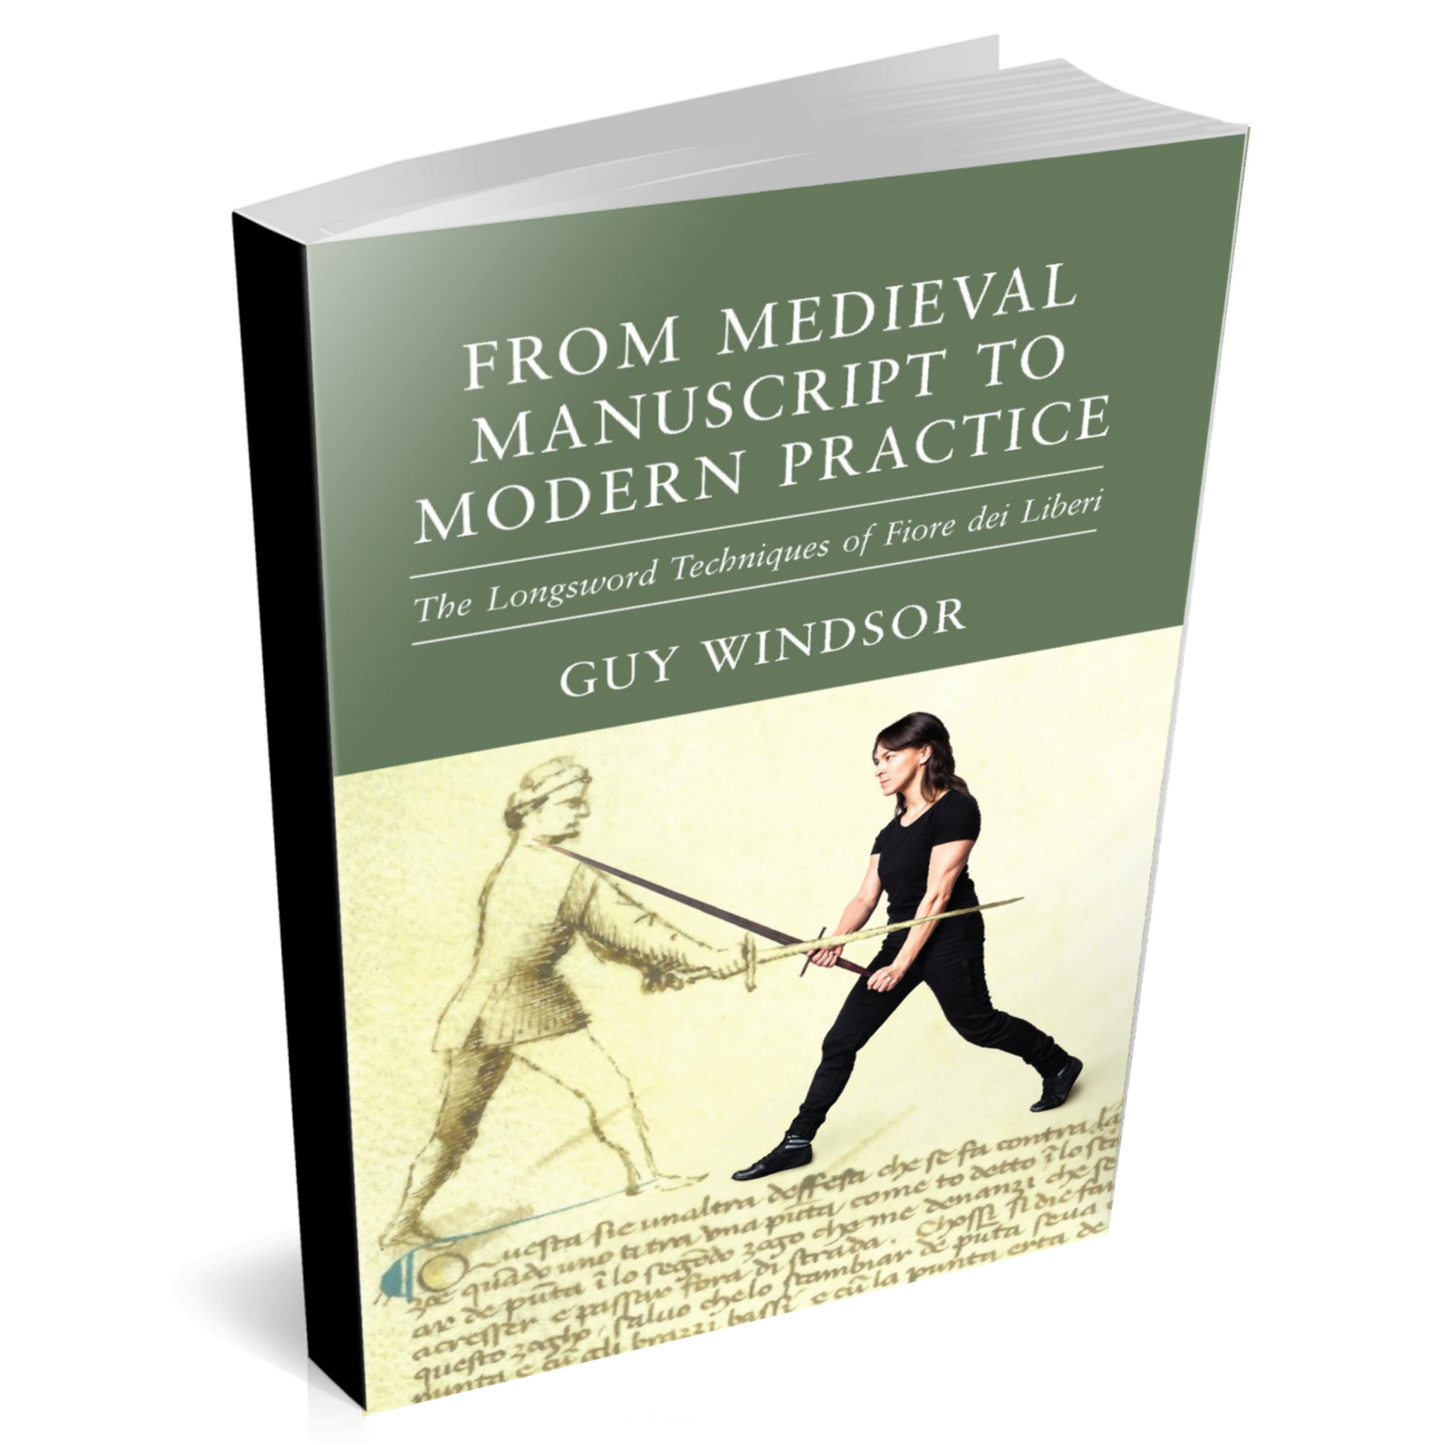 From Medieval Manuscript to Modern Practice: The Longsword Techniques of Fiore dei Liberi (paperback)